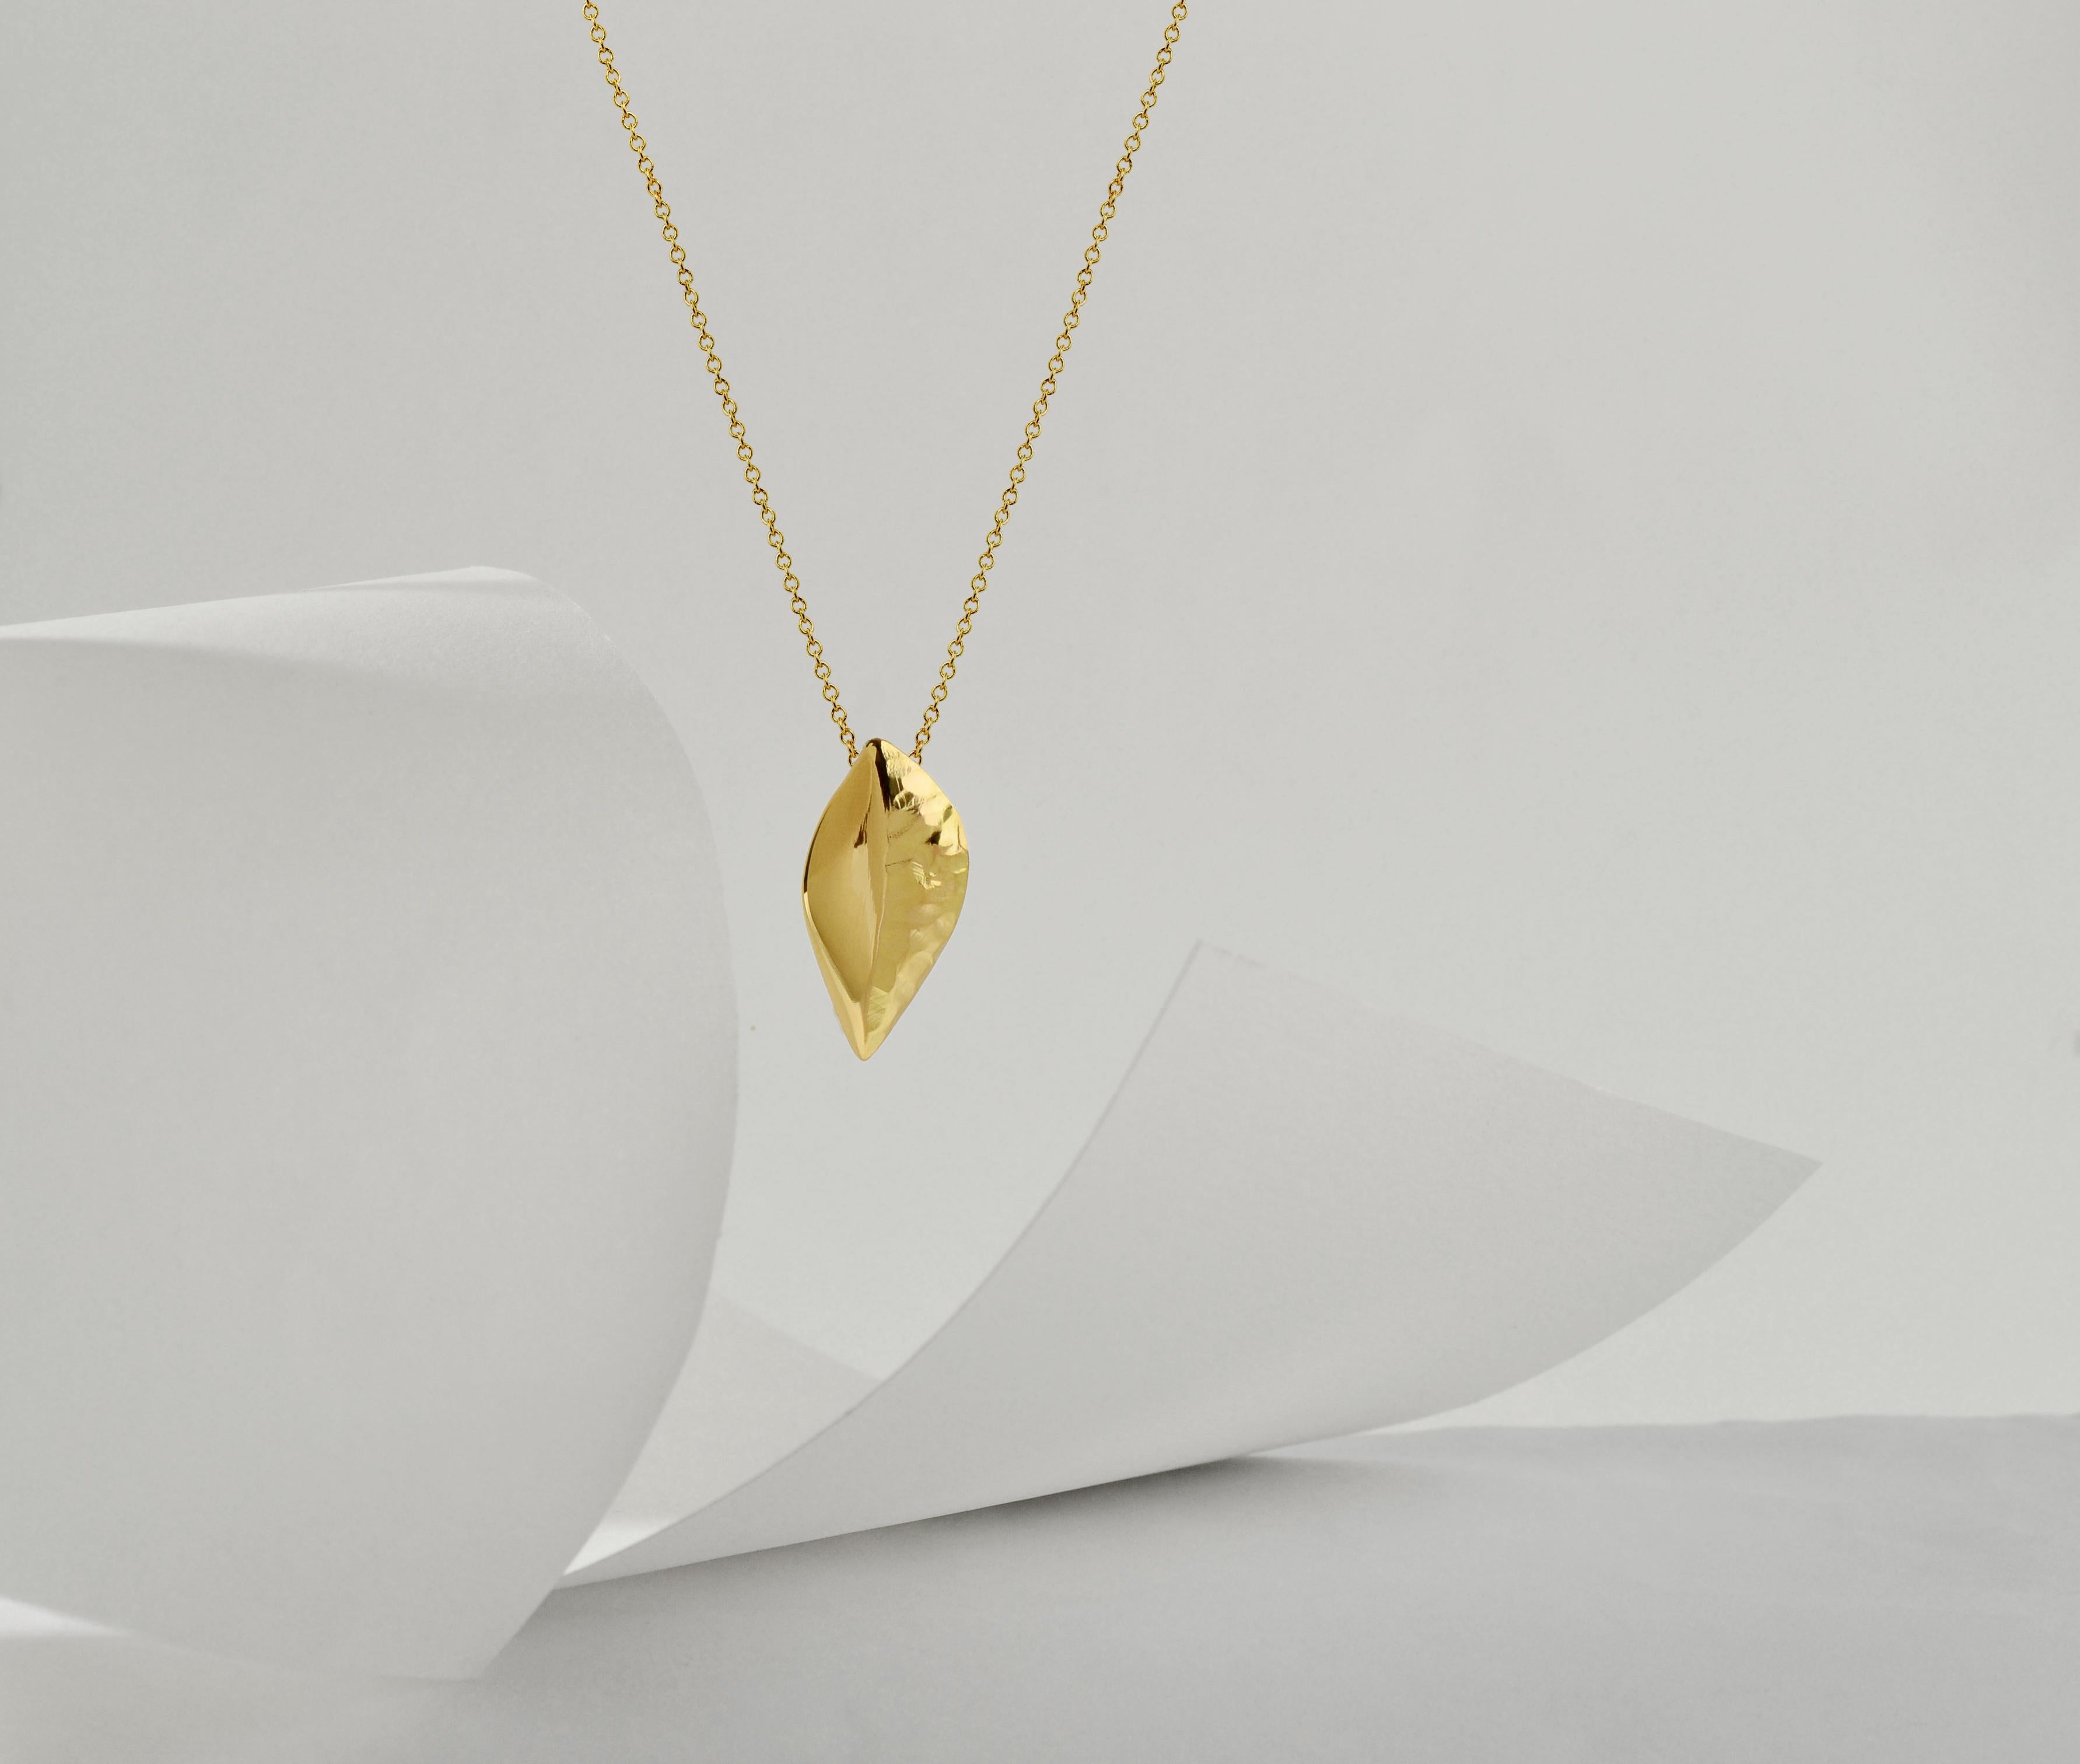 Susan Crow Studio Leaf Pendant With Chain In Certified FAIRMINED Yellow Gold For Sale 1